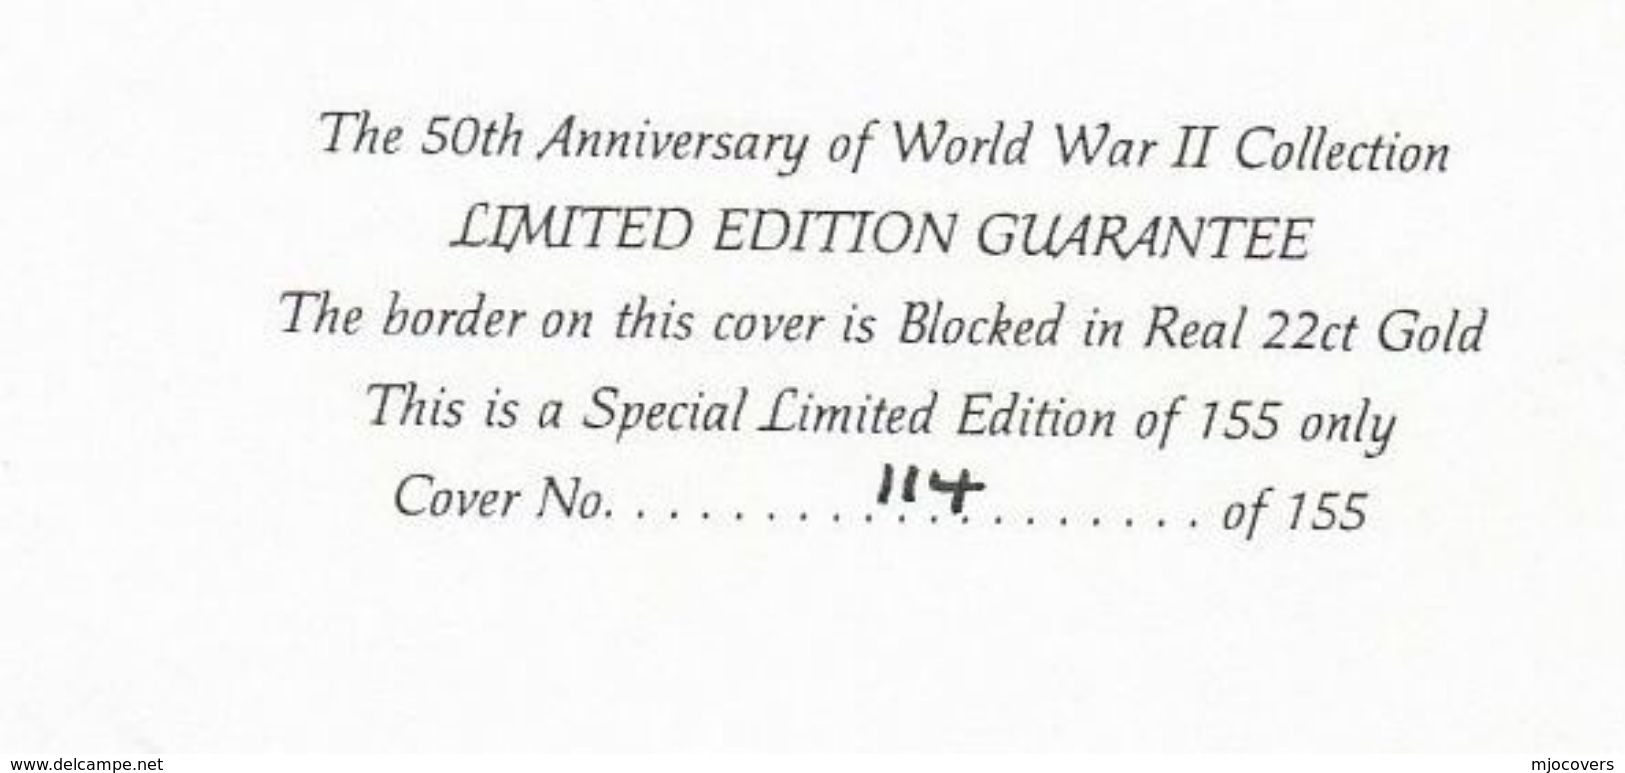 1992 GB Very Ltd EDITION COVER Anniv BAEDEKER RAIDS On YORK & EXETER Bombing WWII Event Aviation Stamps - WW2